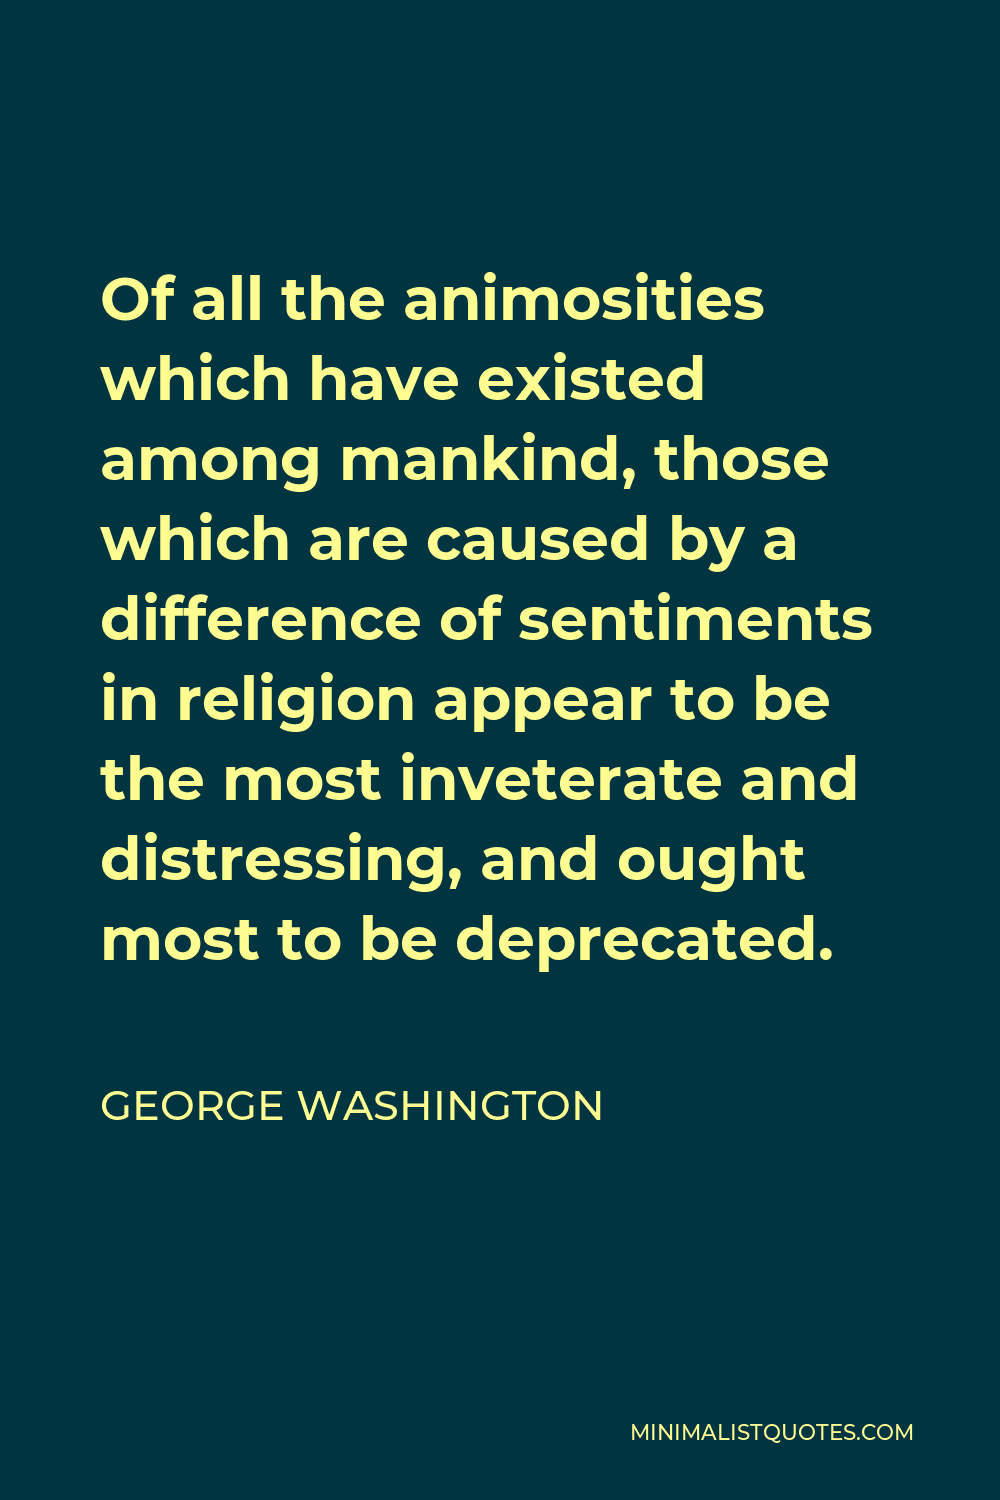 George Washington Quote - Of all the animosities which have existed among mankind, those which are caused by a difference of sentiments in religion appear to be the most inveterate and distressing, and ought most to be deprecated.